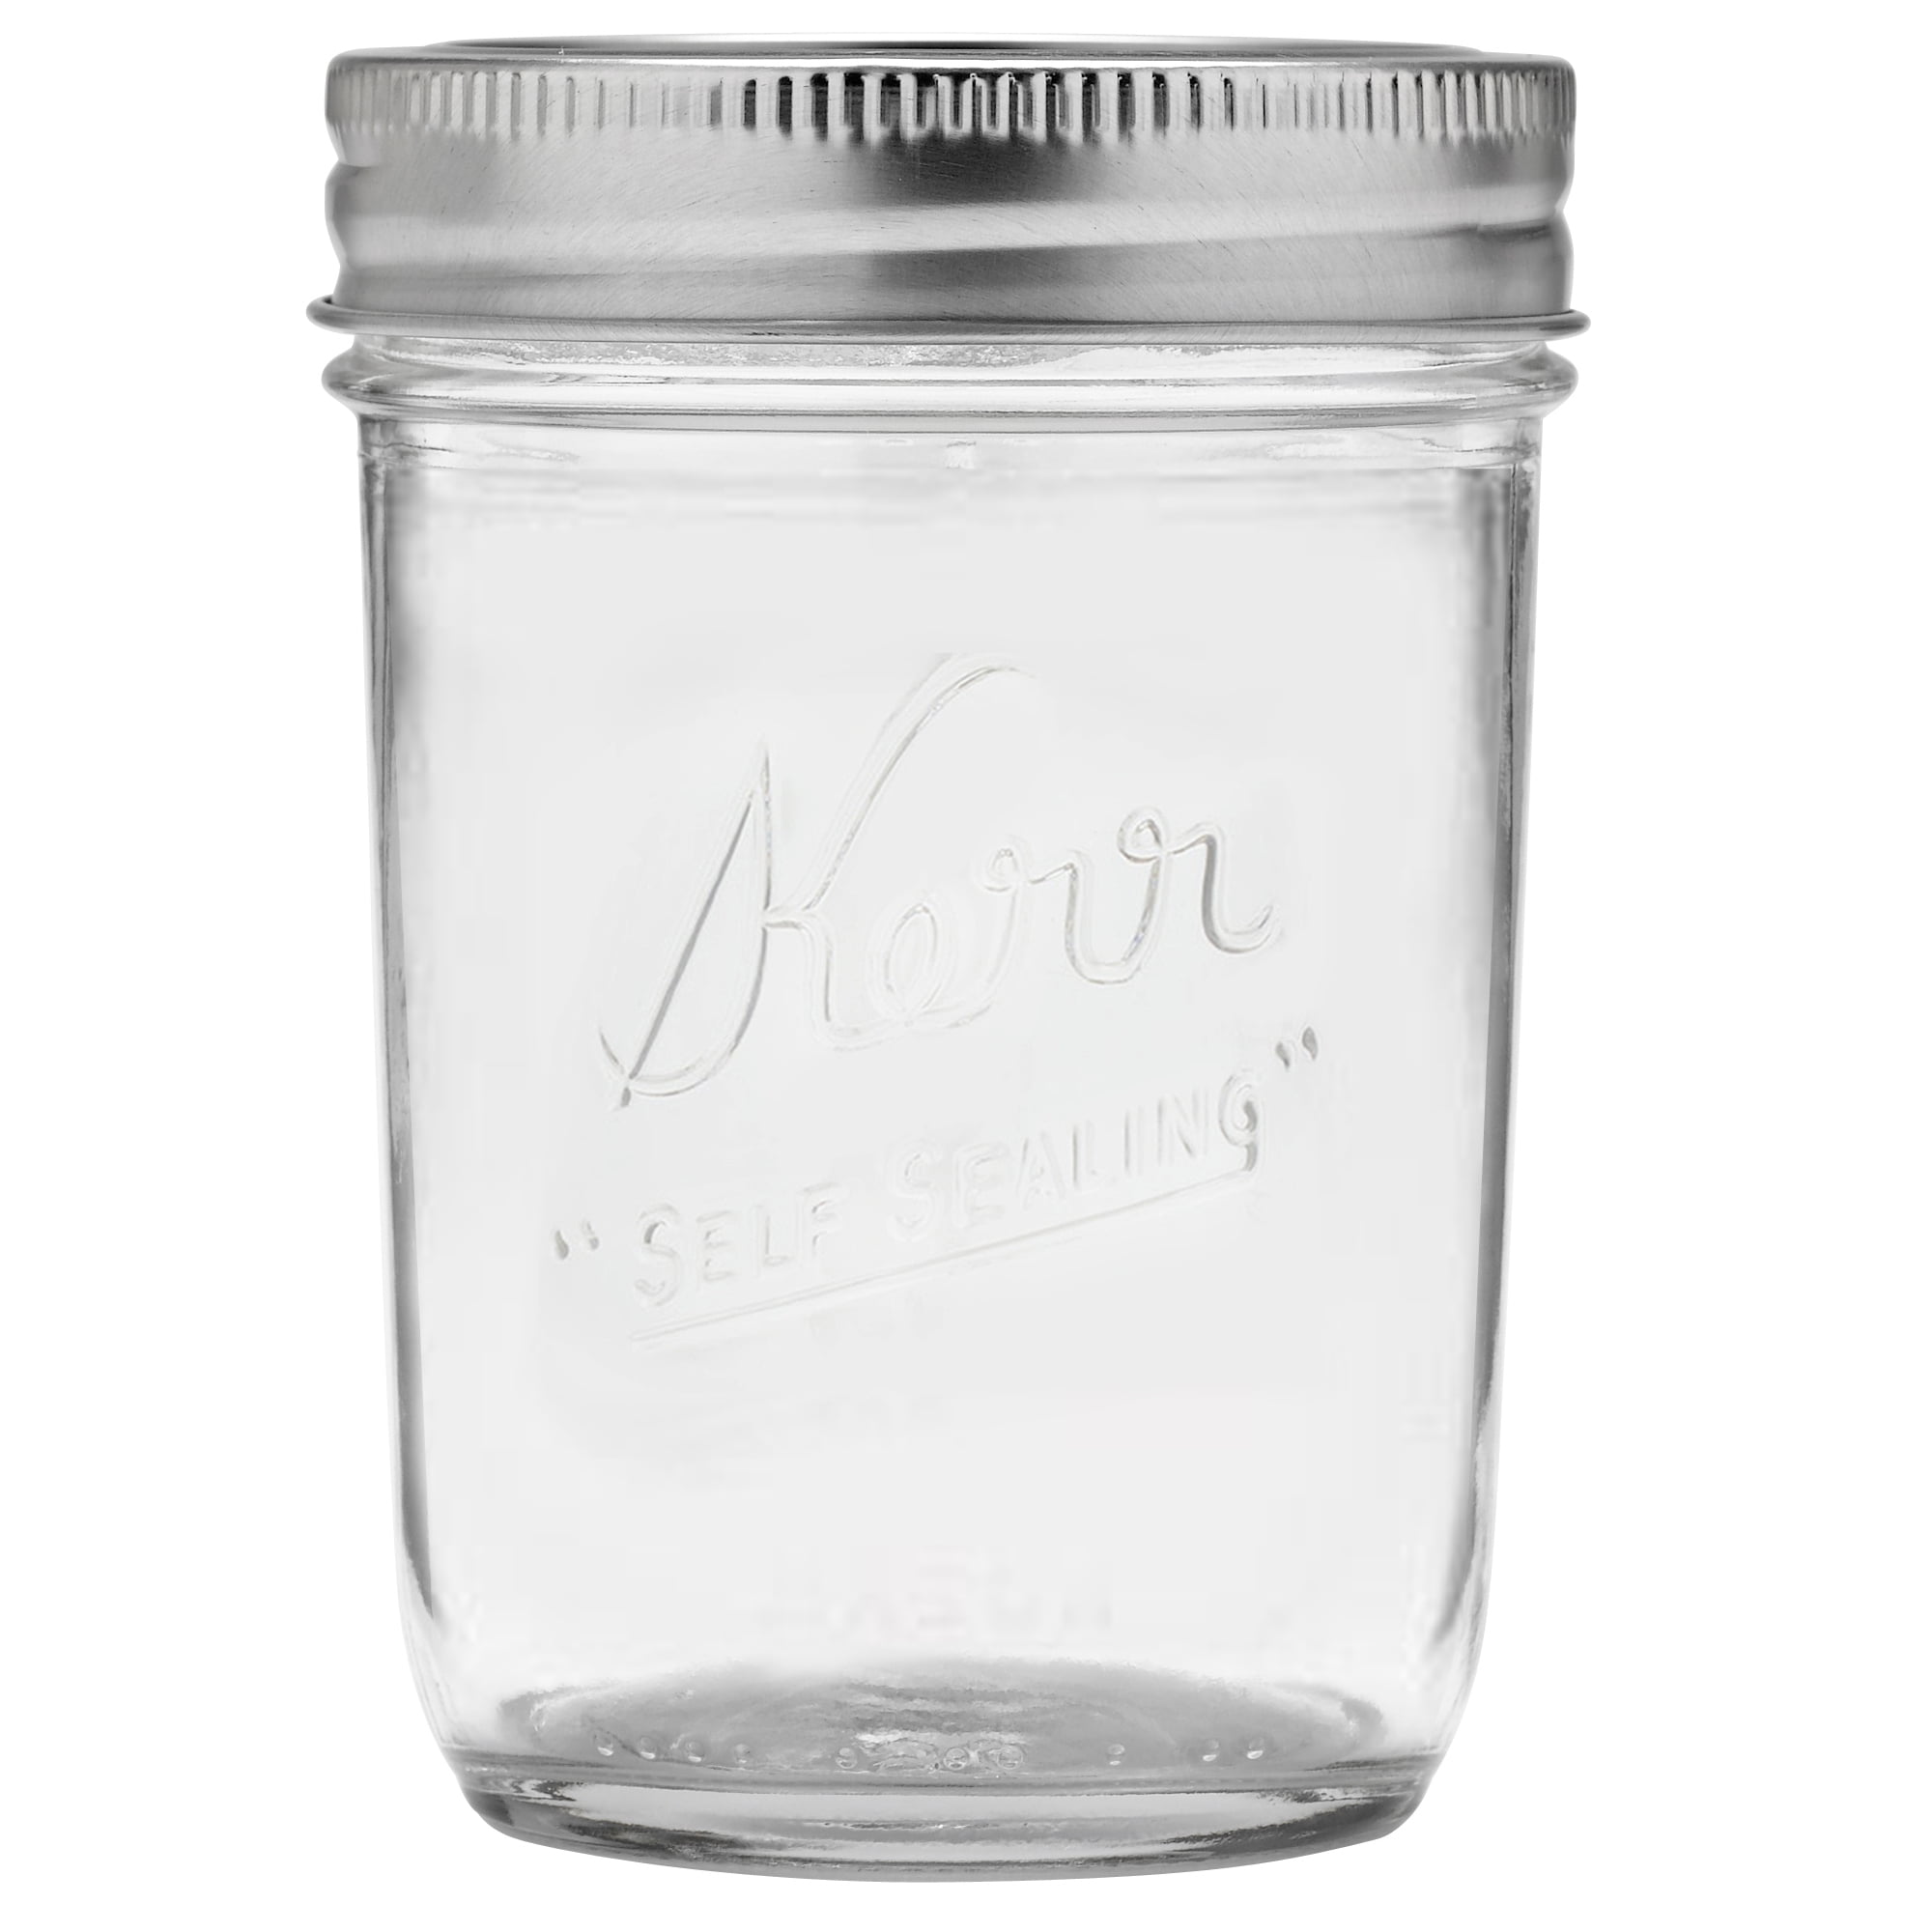 2 BPA Free Made in the USA by Jarming Collections Plastic Mason Jar Lids- Leak Proof Glass Mason Jars with Lids Extra Wide Mouth Mason Jar 32 oz